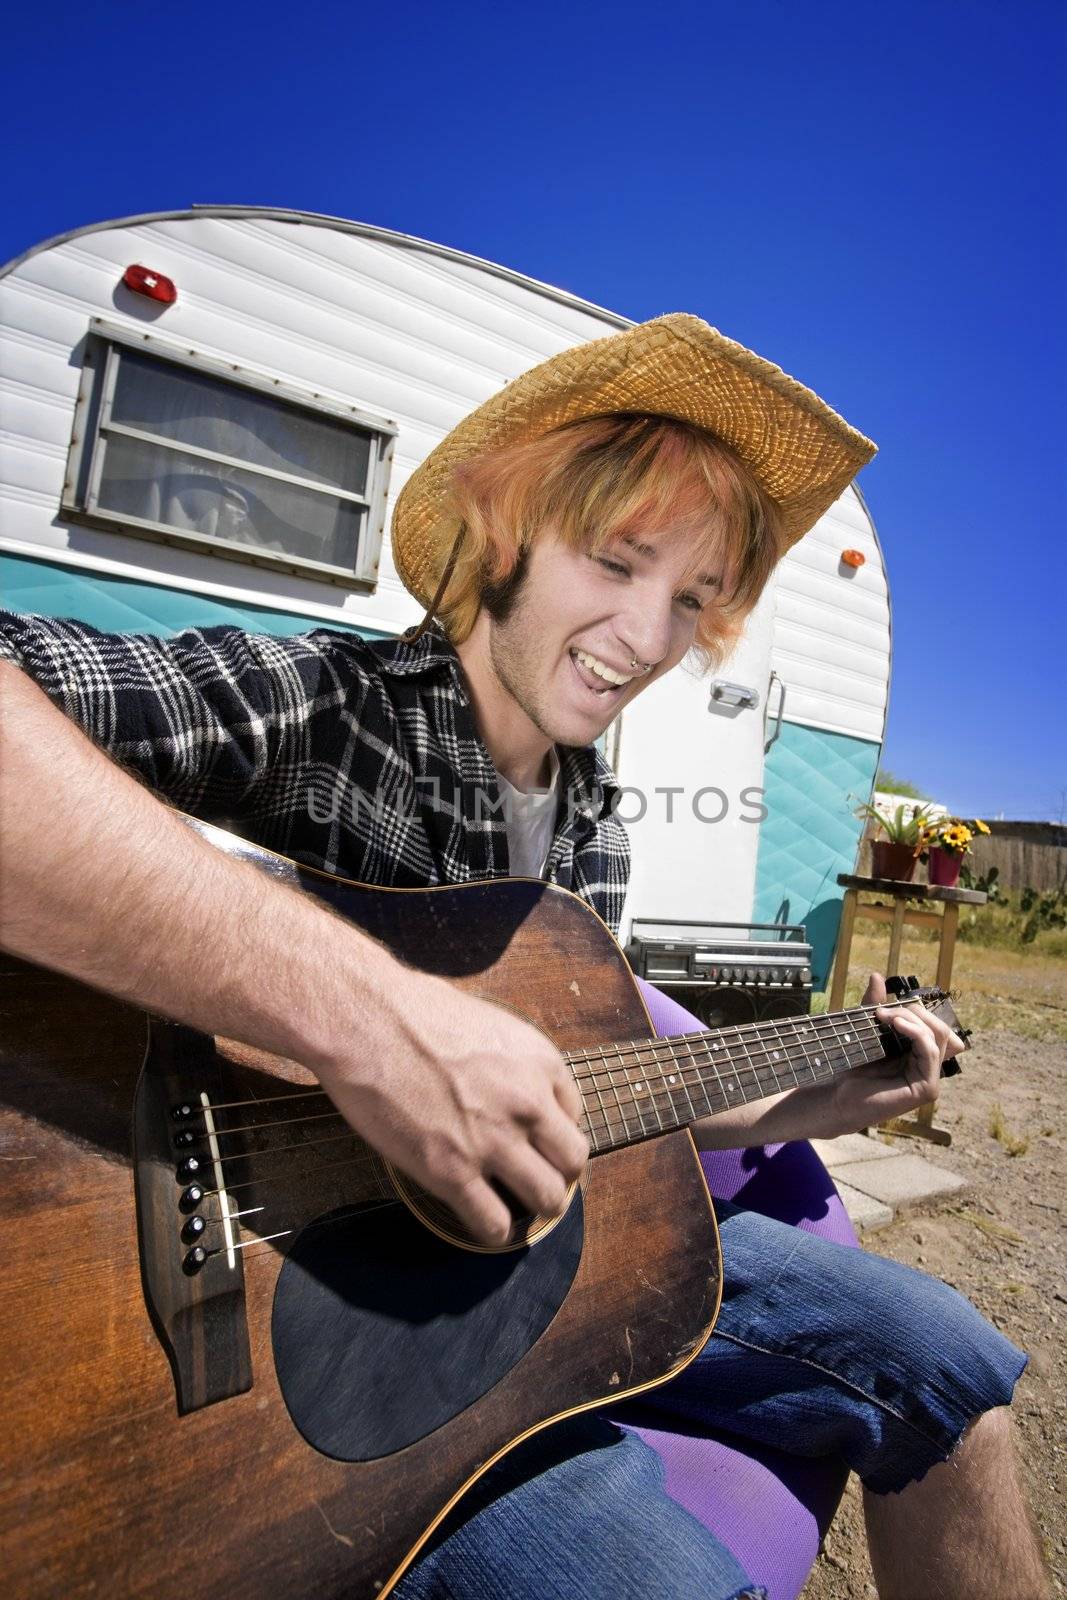 Young Man with Bright Red Hair and a Guitar in front of Trailer